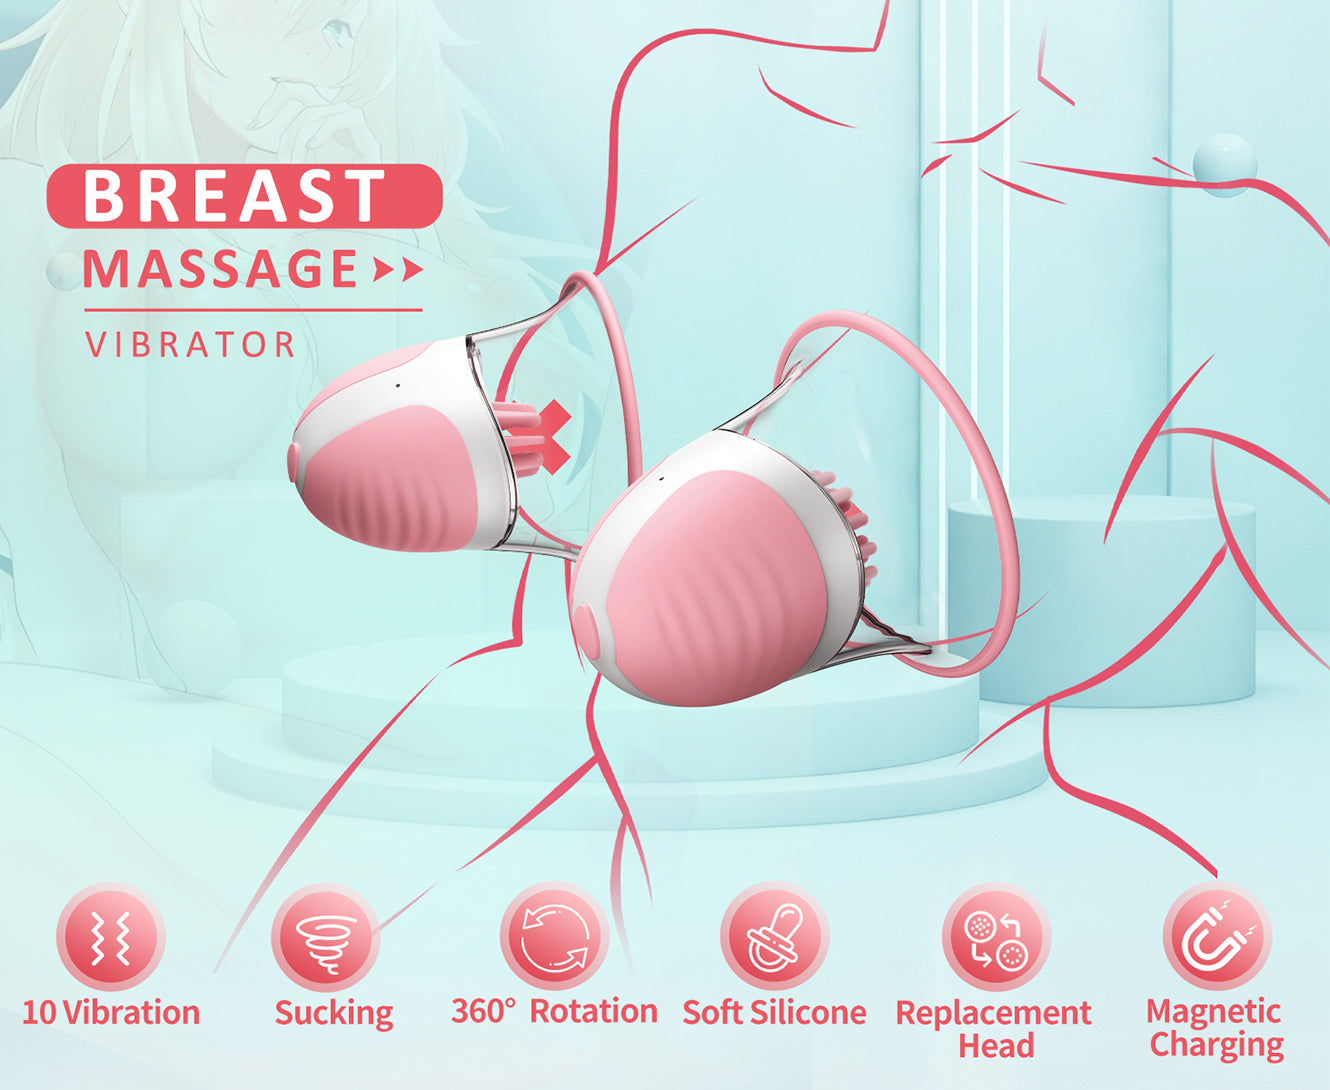 Nipple Toy Clamps, Strong Sucking Stimulator Massager with 10 Vibrator Rotation Modes